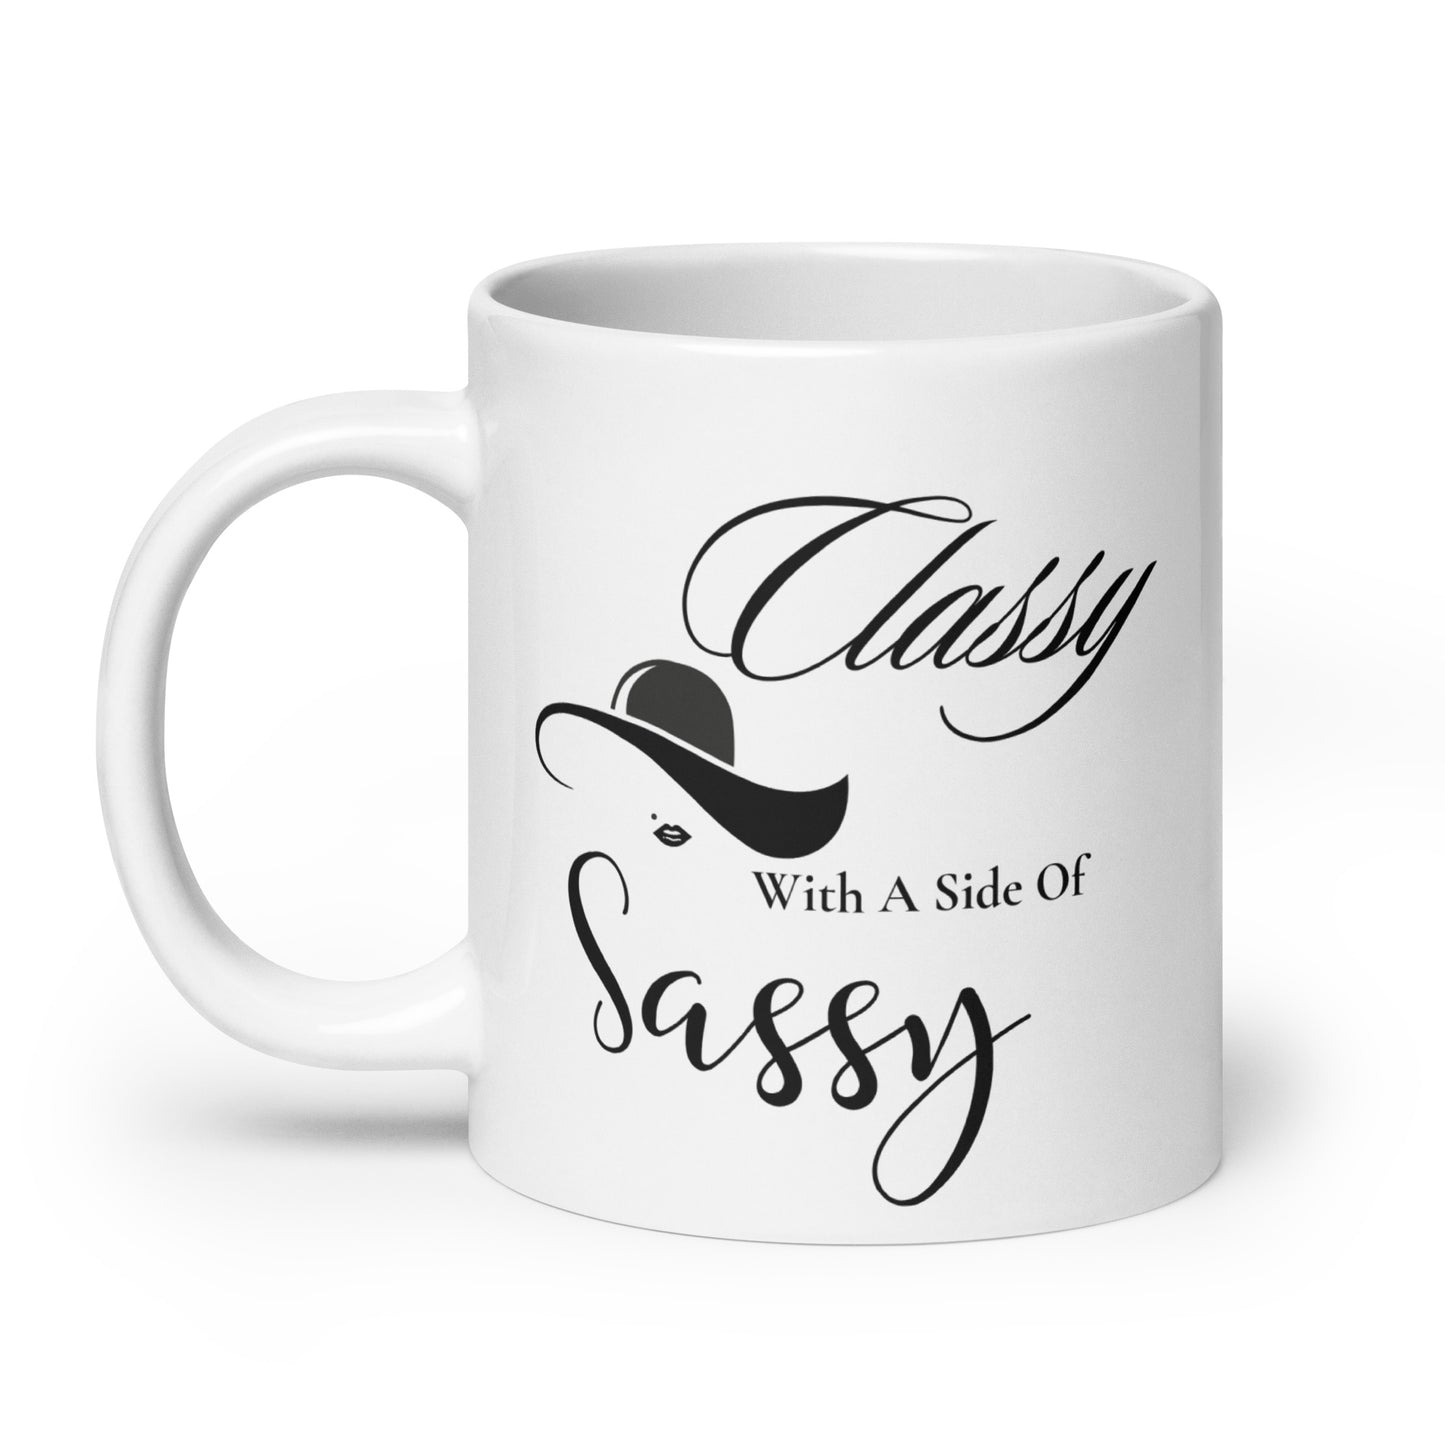 Classy with a side of Sassy White glossy mug